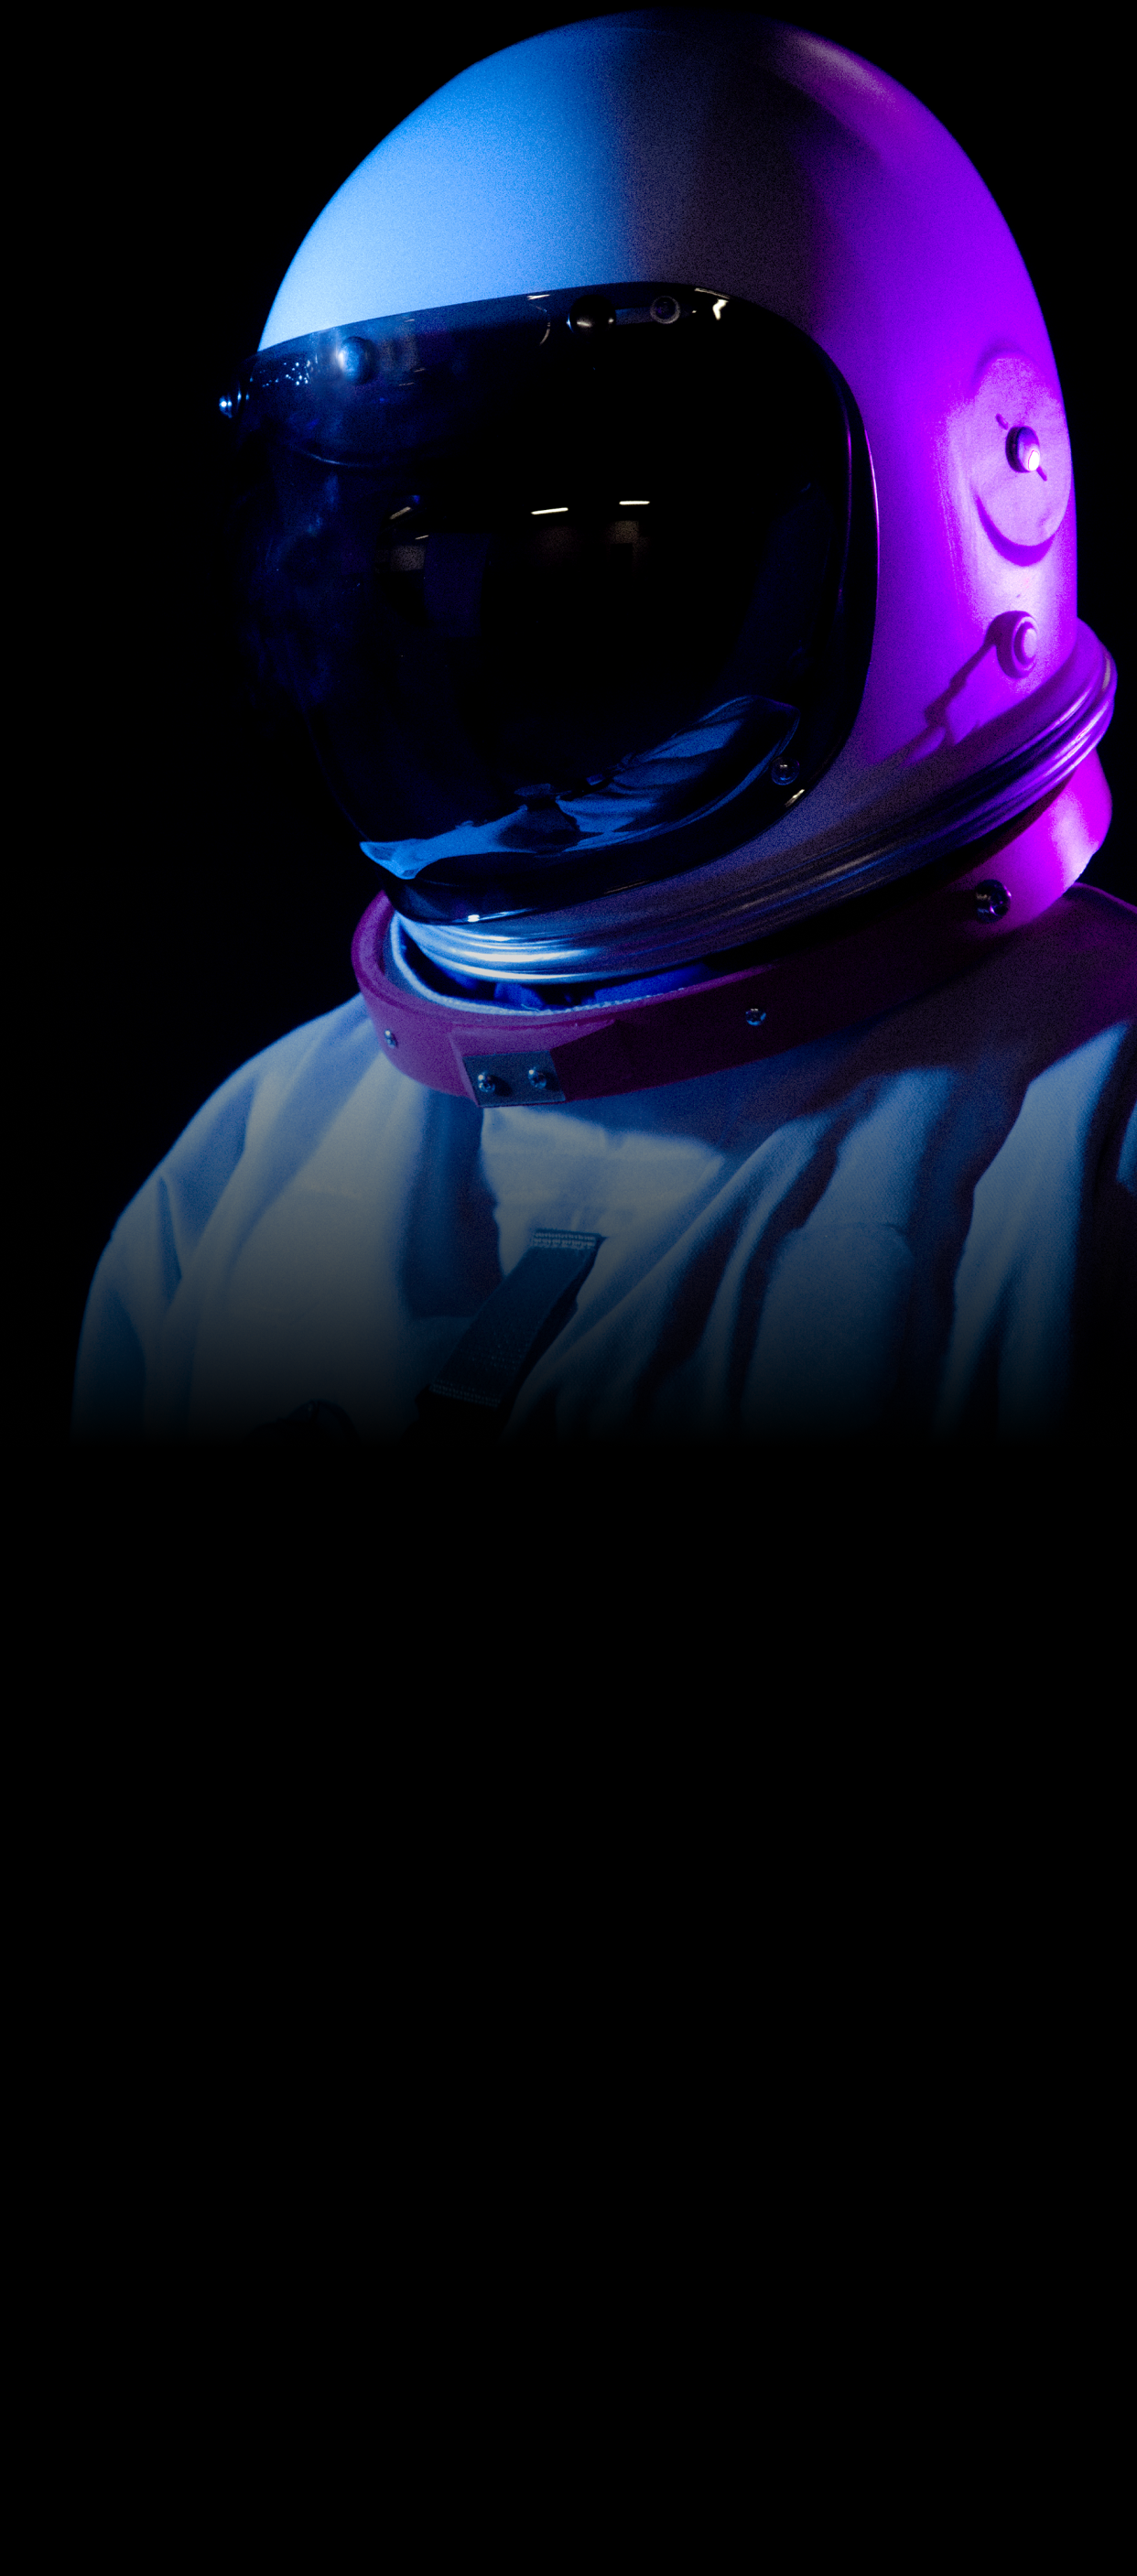 An astronaut in blue and purple light.